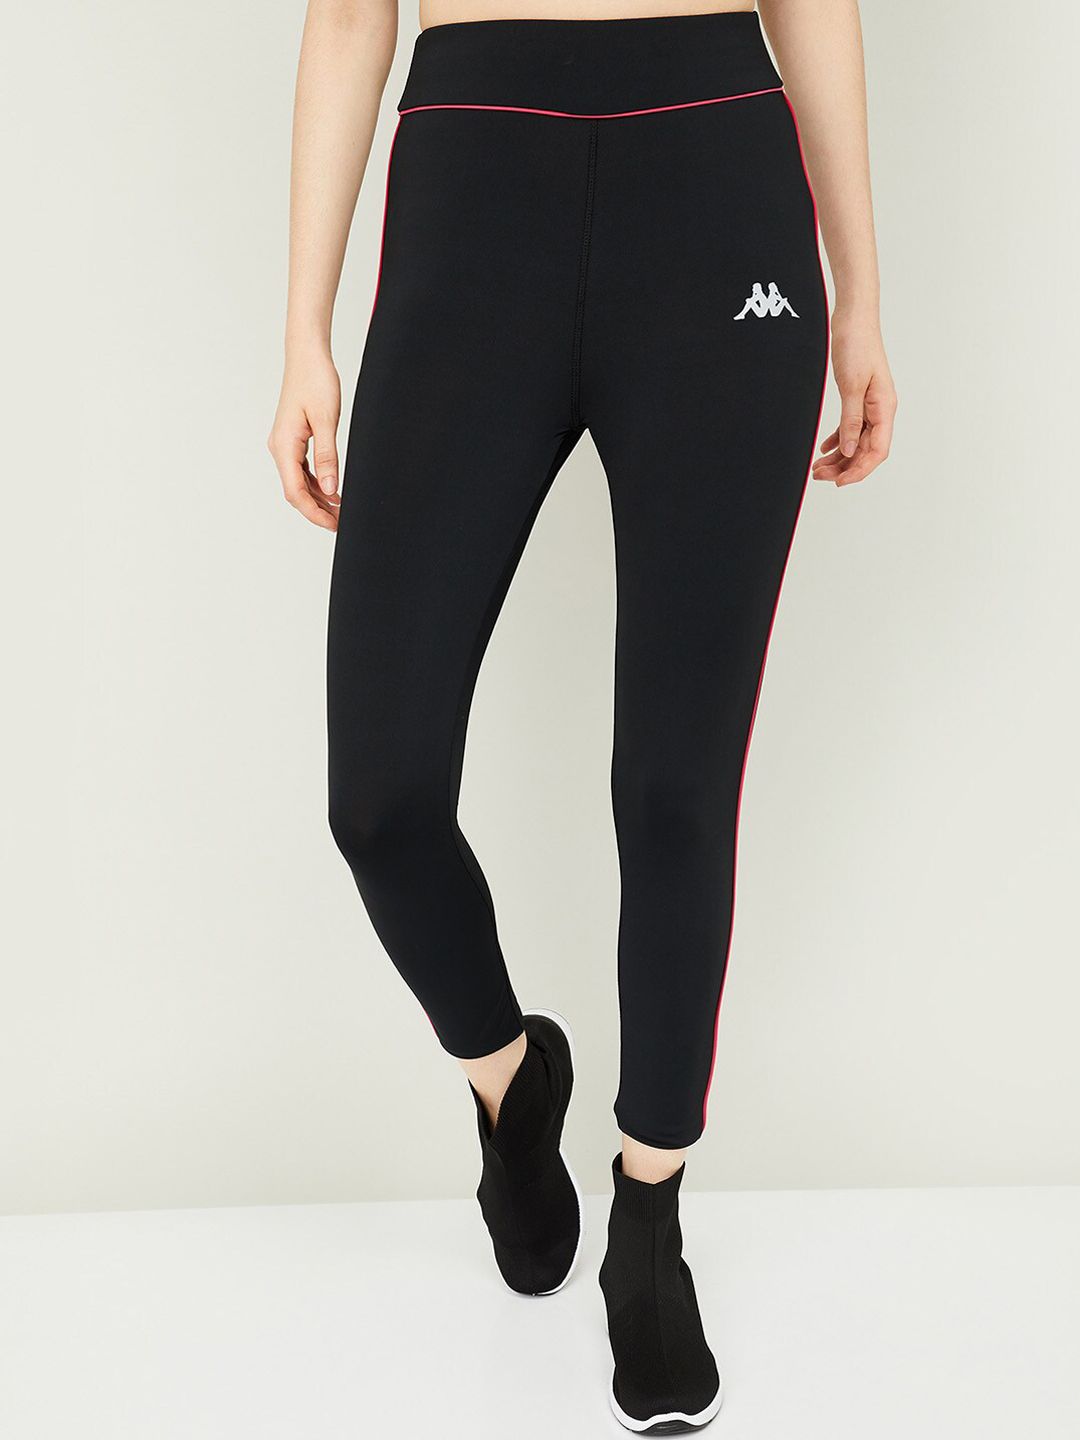 Kappa Women Black Solid Training Tights Price in India